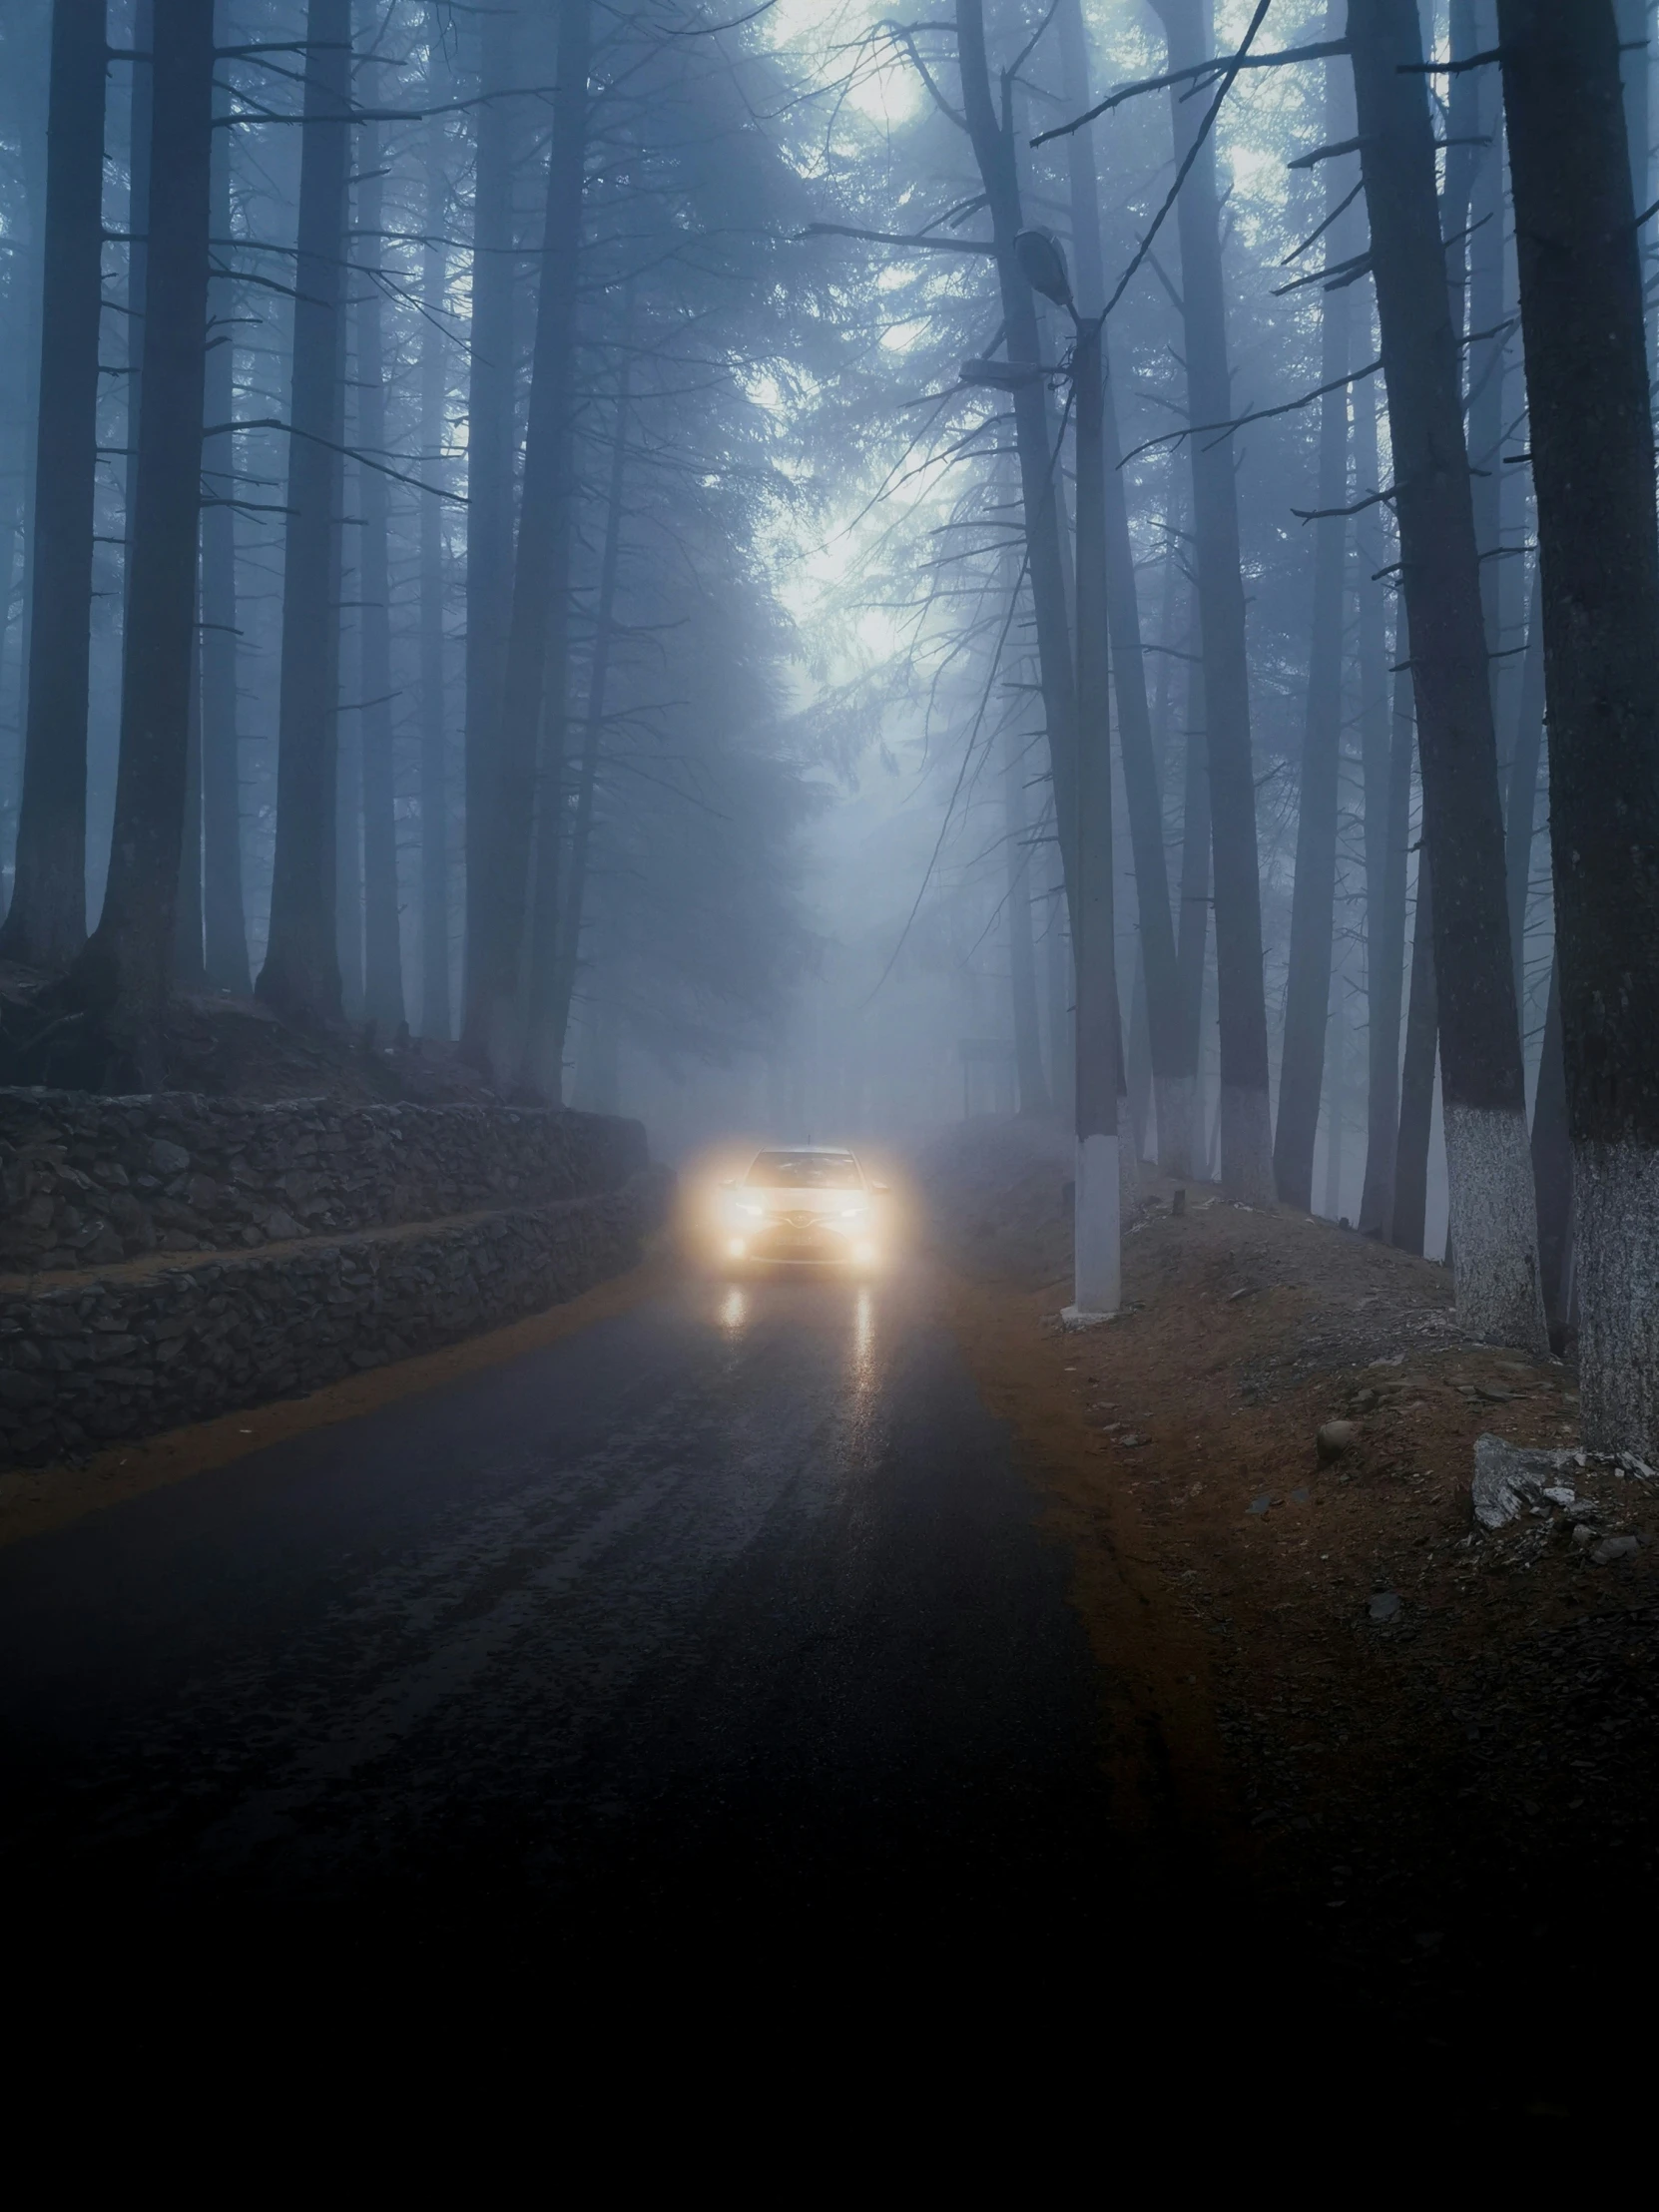 the car drives through the forest in a fog